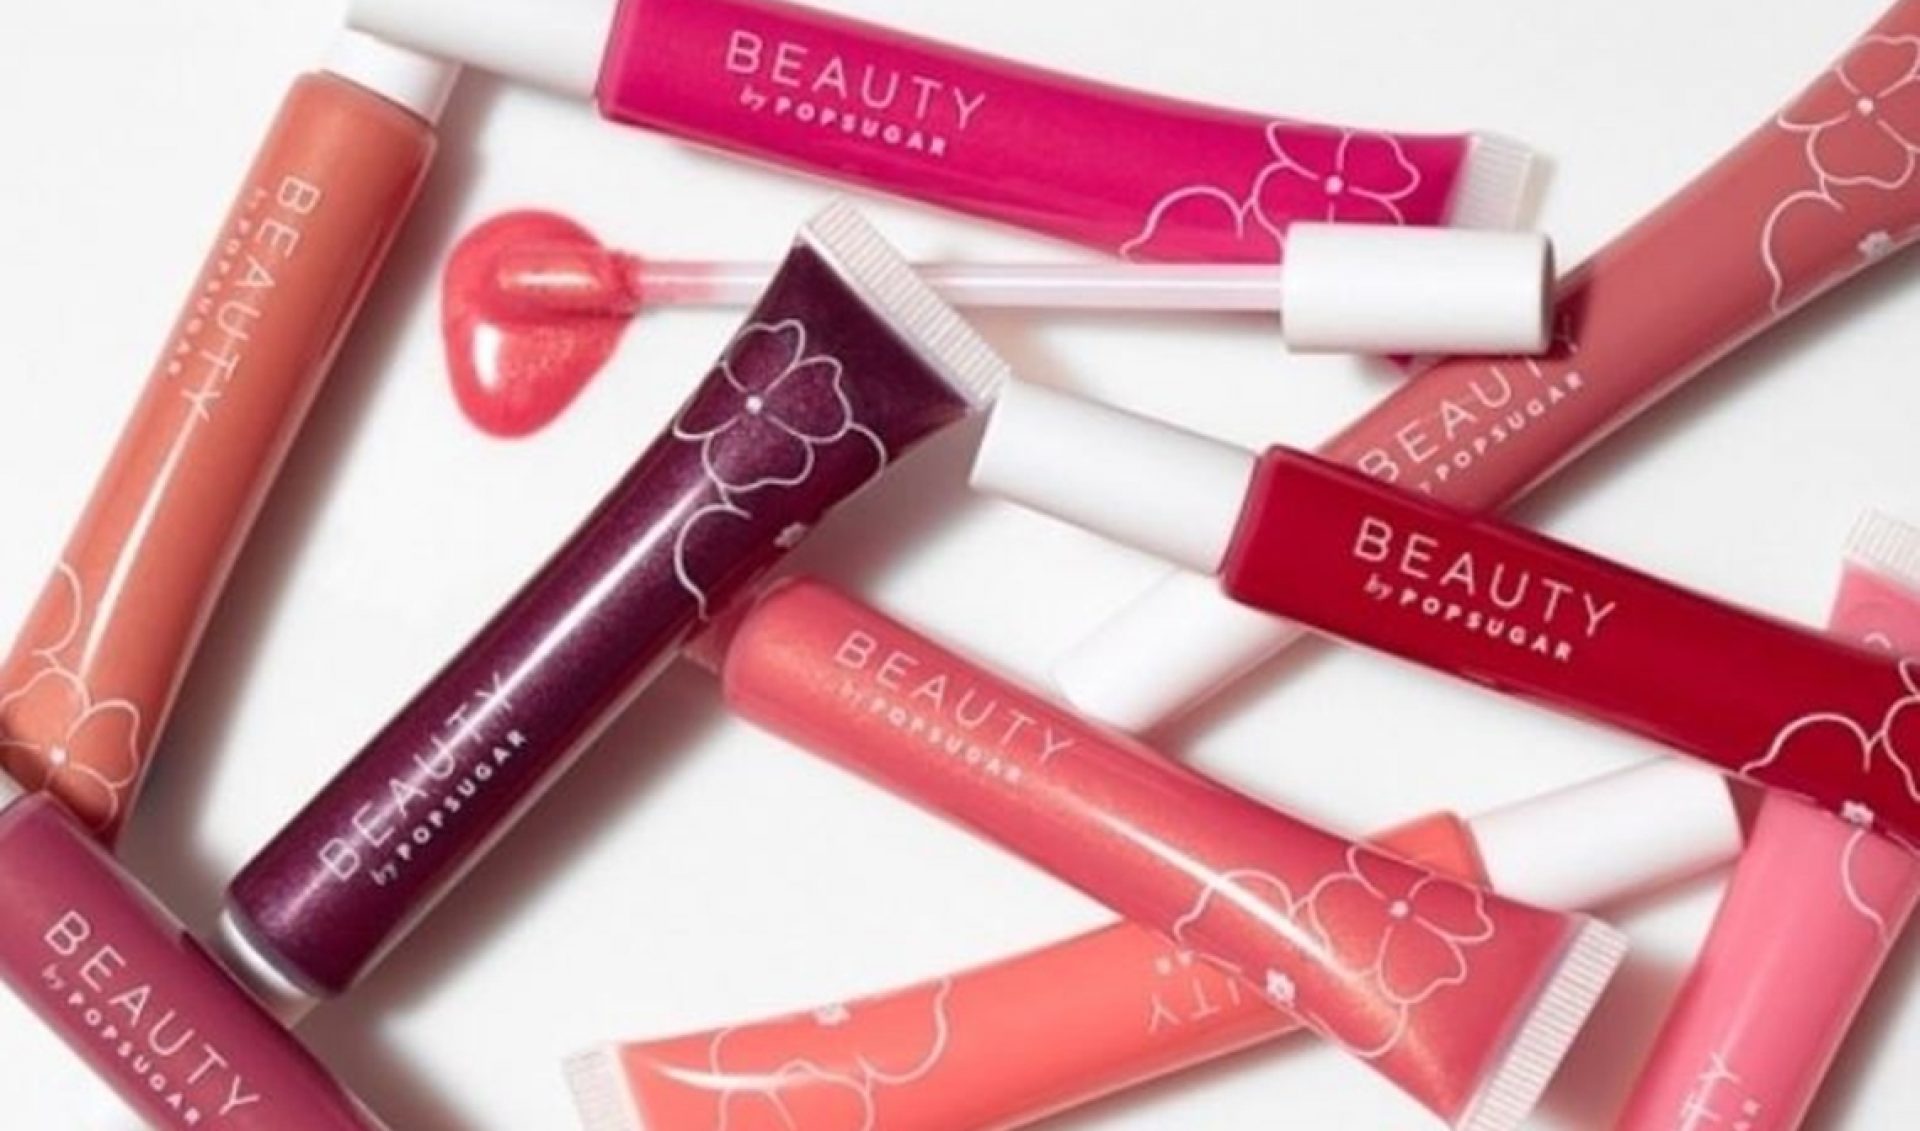 PopSugar Launches Self-Branded Beauty Line In Partnership With Ulta